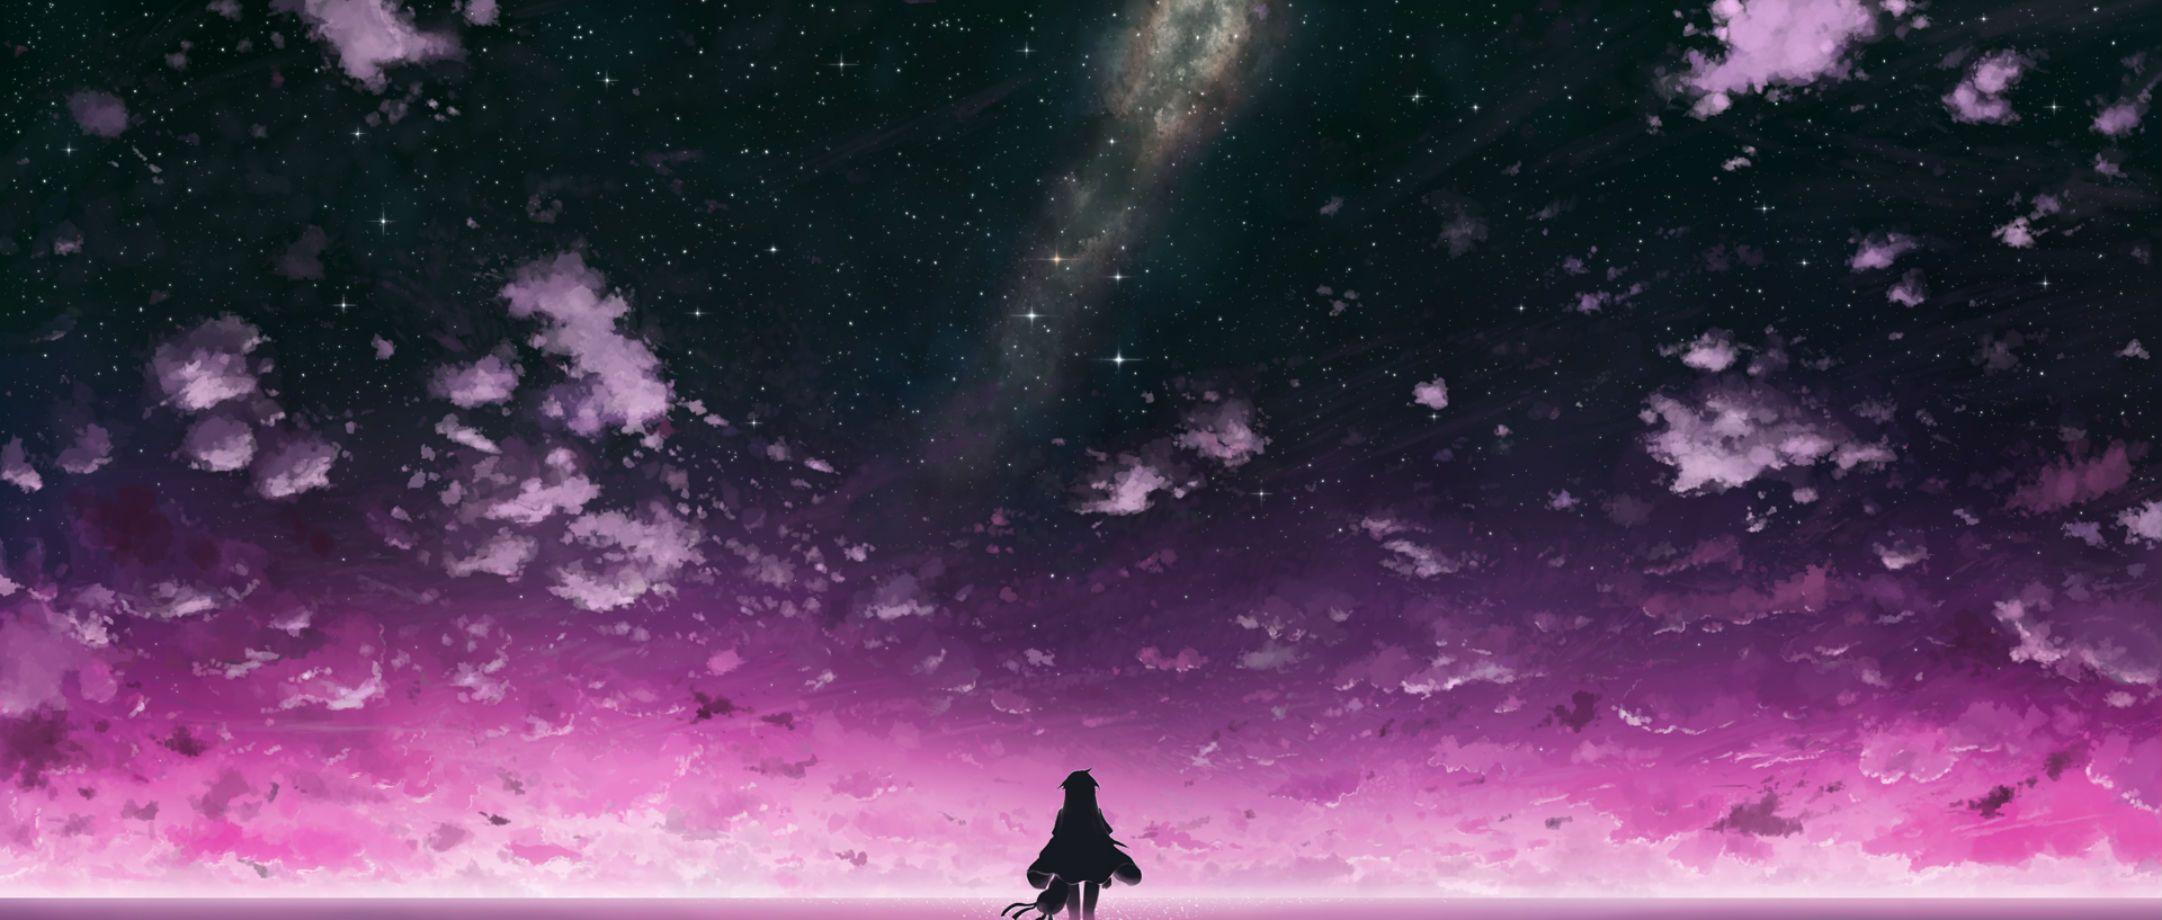 Purple Anime Wallpapers Top Free Purple Anime Backgrounds Wallpaperaccess